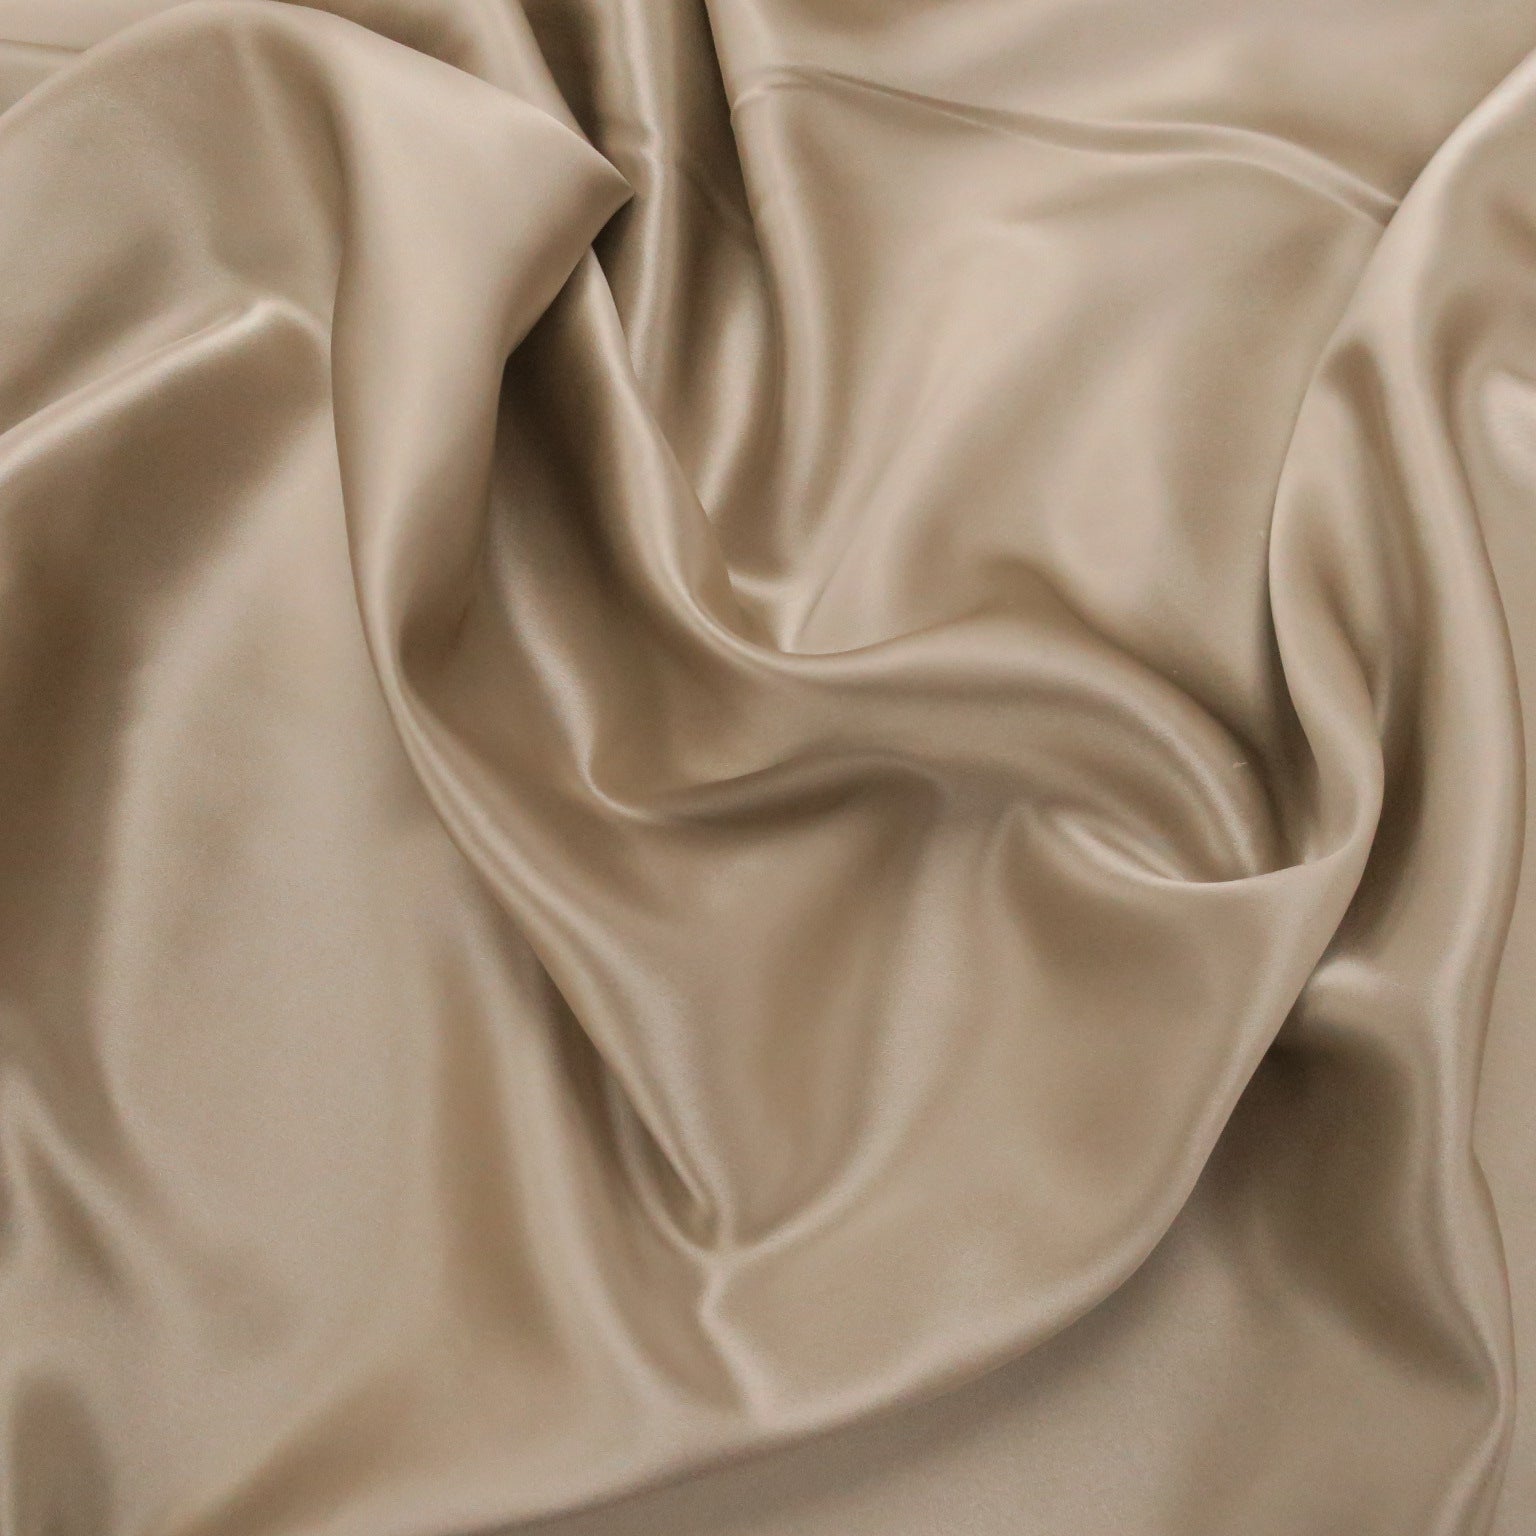 Silk Chantilly Lace Fabric: 100% Silk Fabrics from Italy by Marco